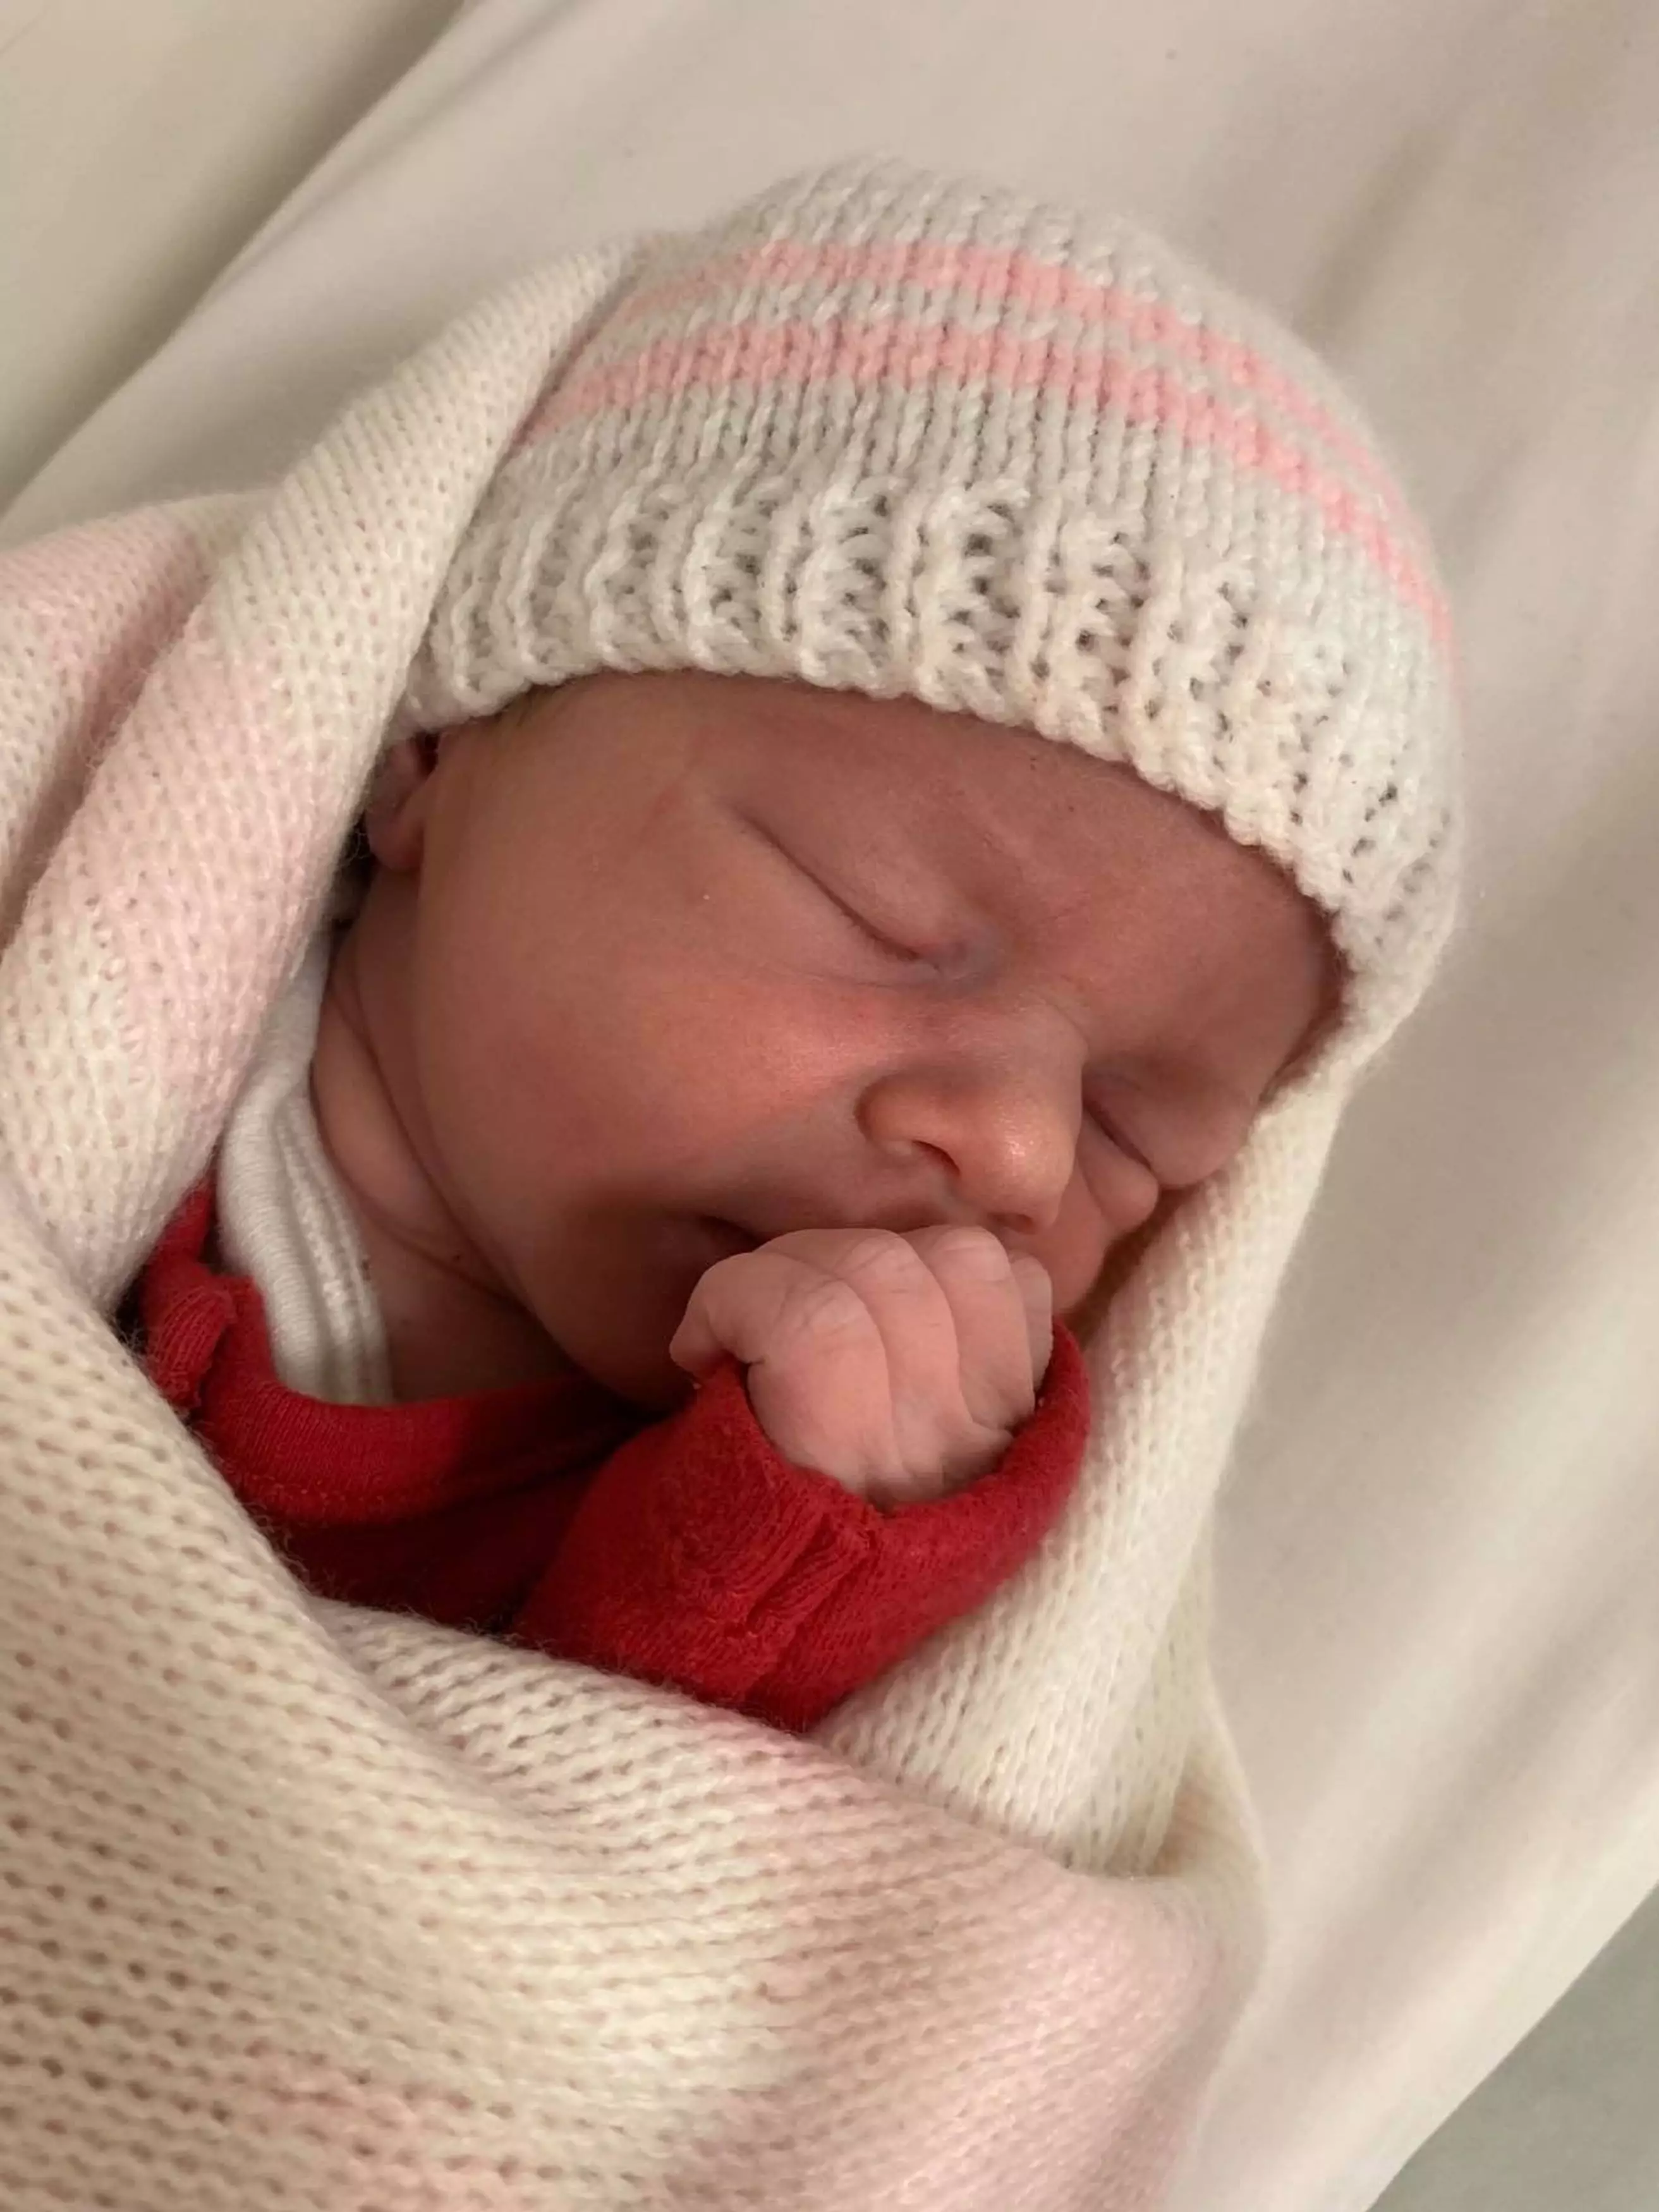 Little Sienna weighed in at 7lbs 5.5oz - both mum and baby were given a perfect bill of health and sent home (